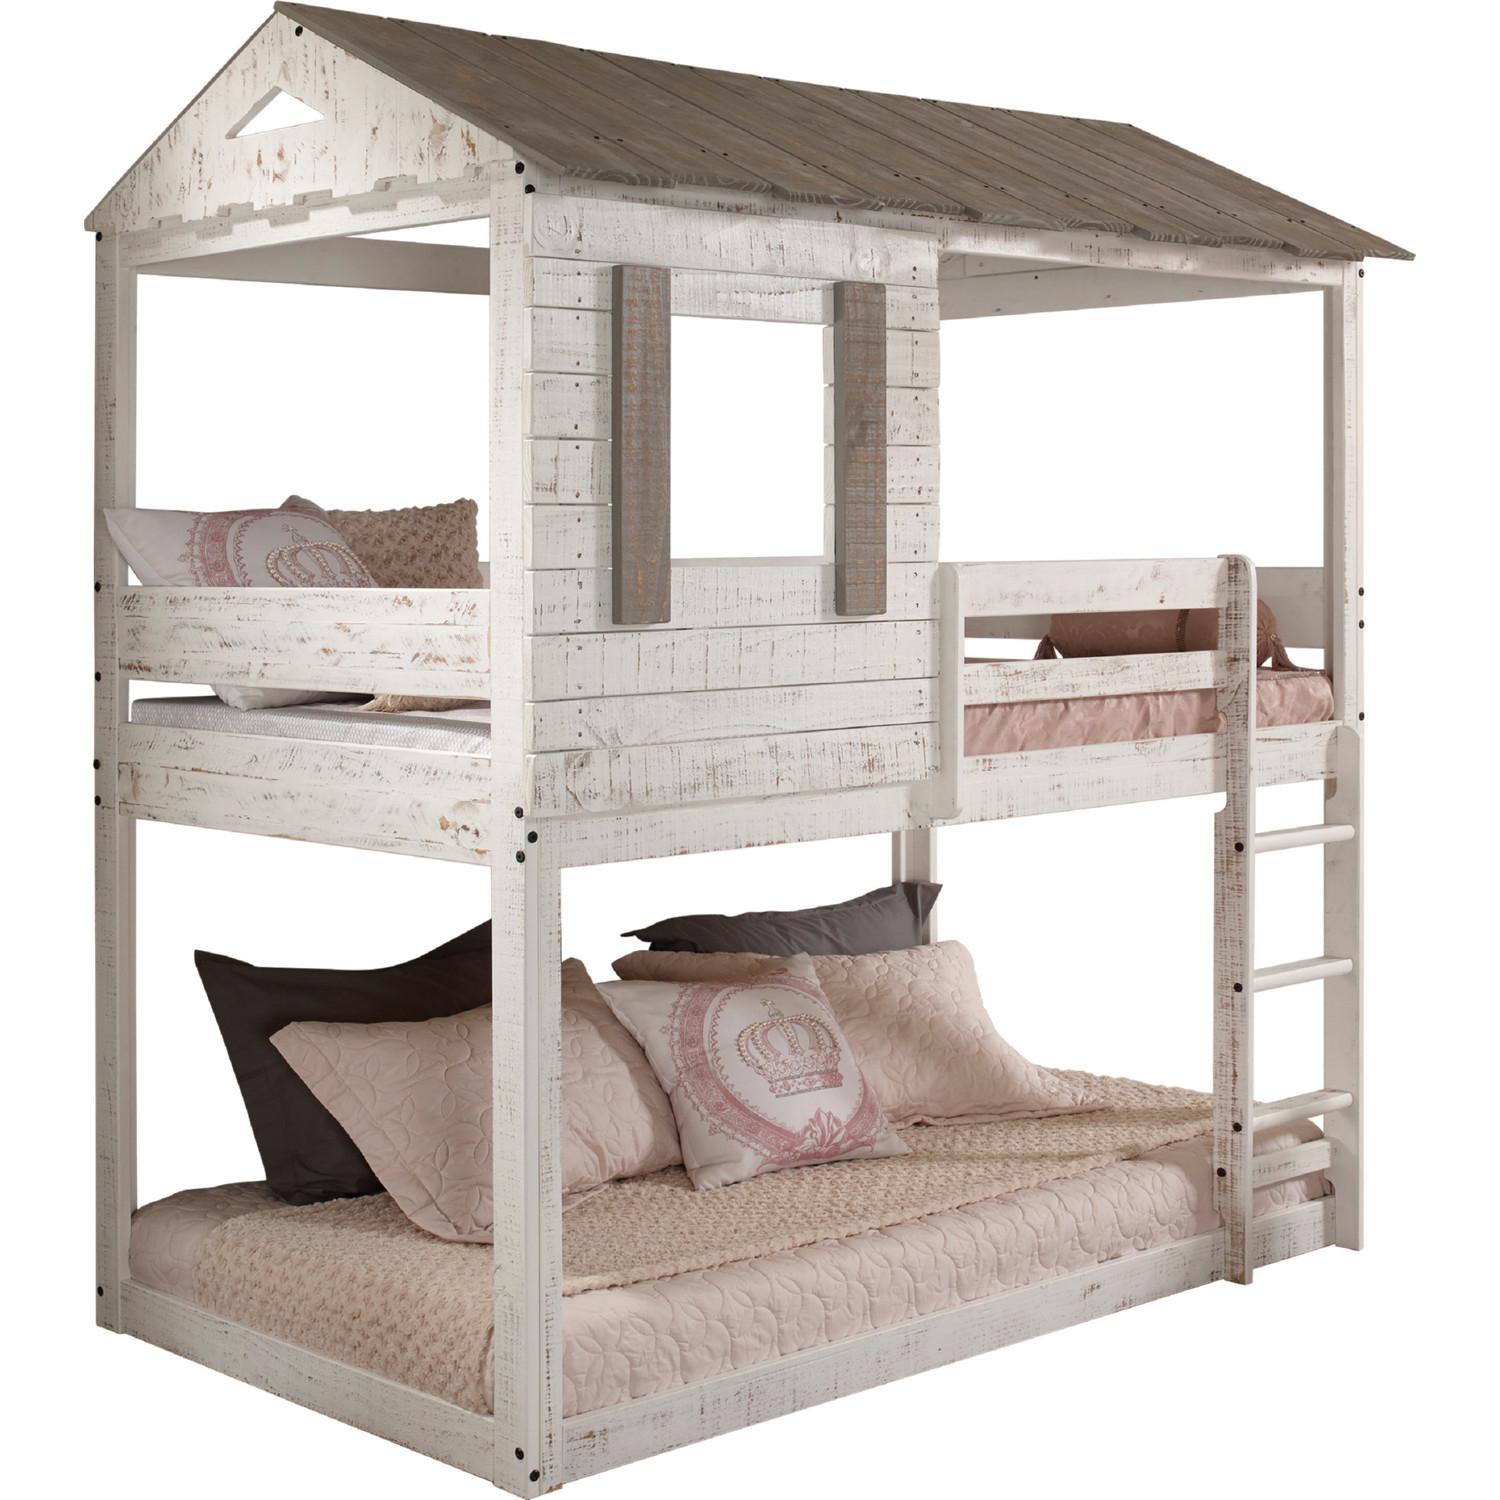 

    
Cottage Rustic White Twin/Twin Bunk Bed by Acme Darlene 38135
